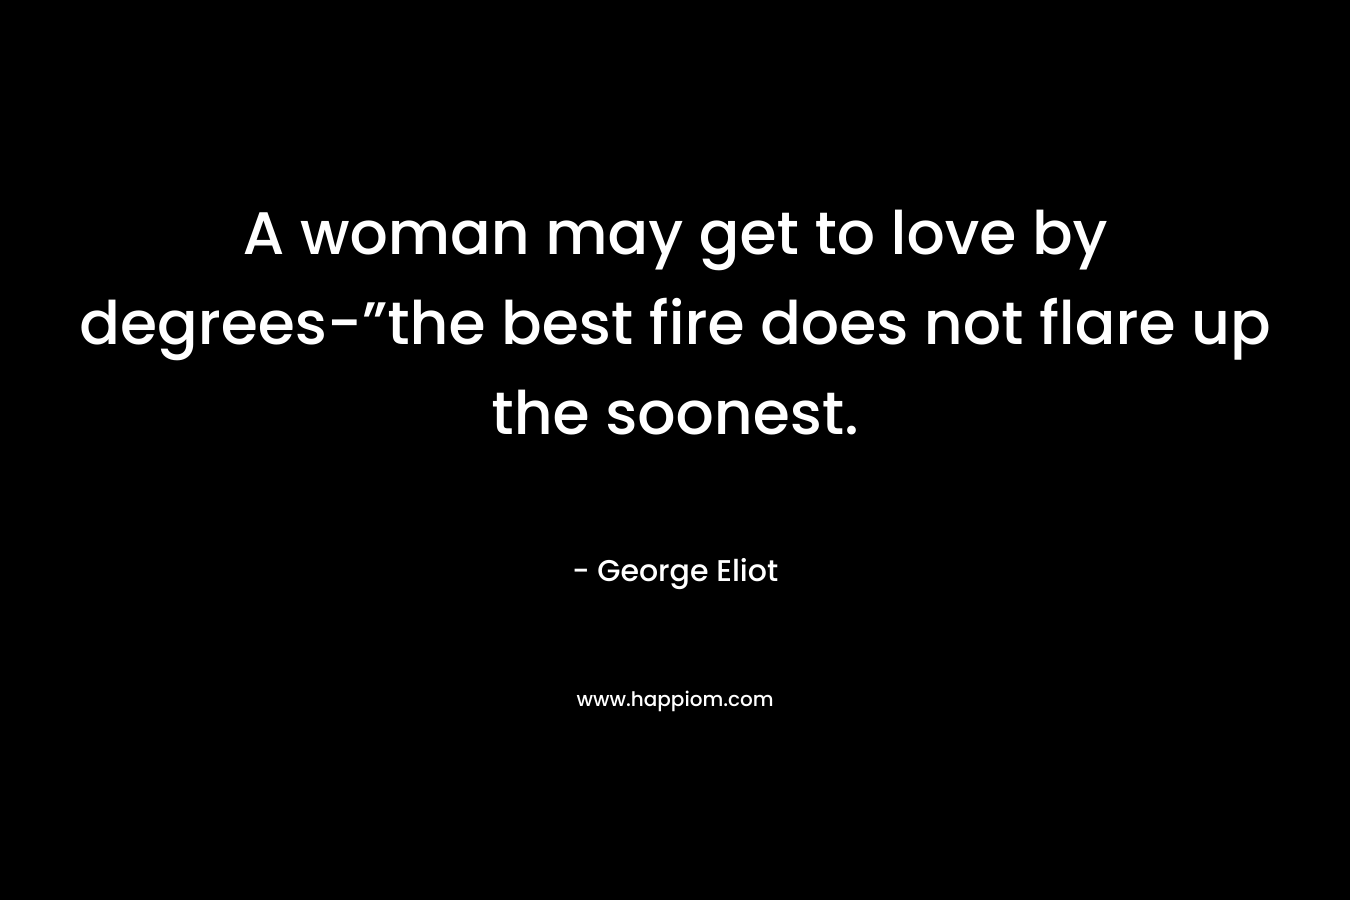 A woman may get to love by degrees-”the best fire does not flare up the soonest.